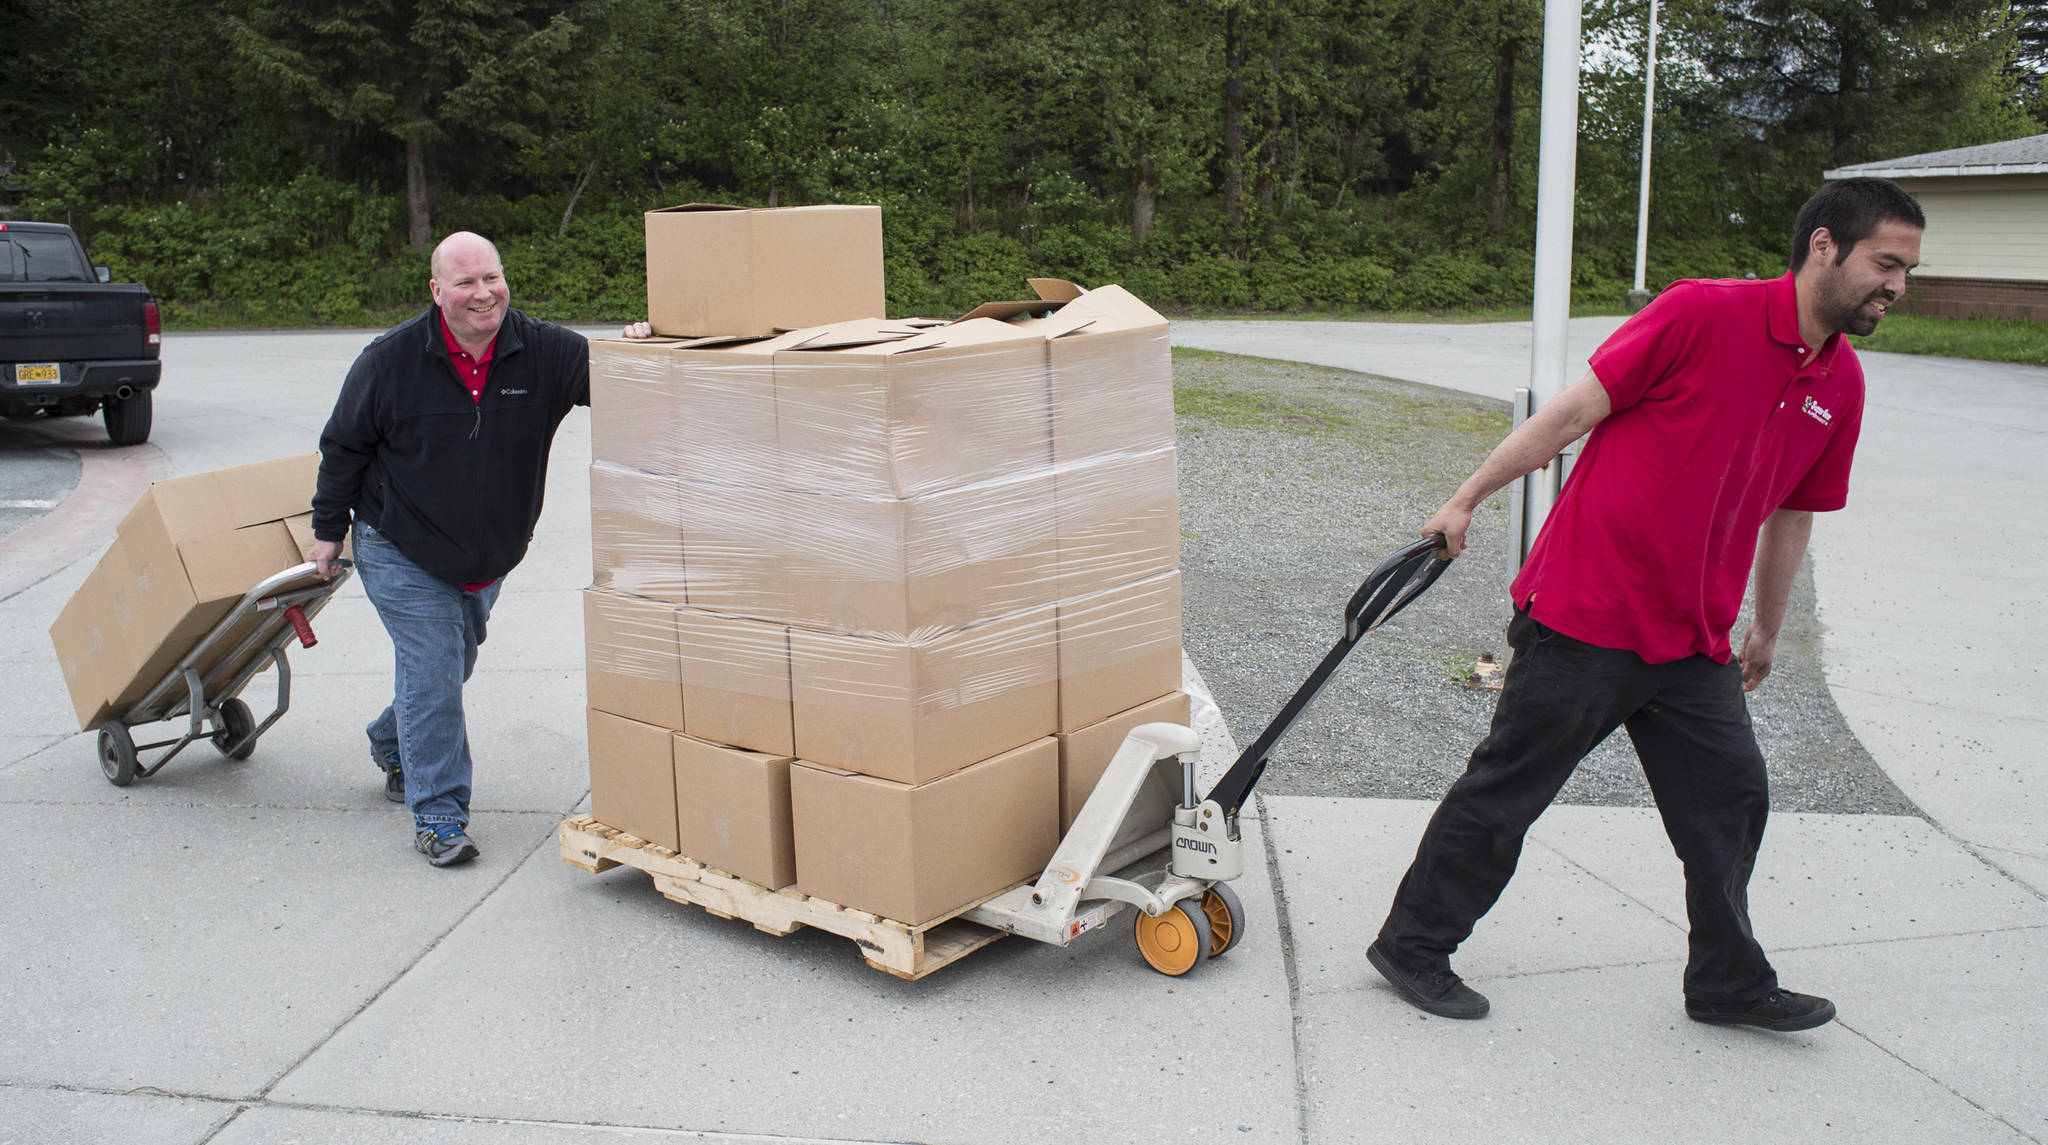 Brad Folckomer, perishable foods manager for Foodland IGA, left, and cashier Brian Lauth deliver 29 boxes of food for the store’s 3 Square Program to Riverbend Elementary School on Wednesday, May 24, 2017. (Michael Penn | Juneau Empire)